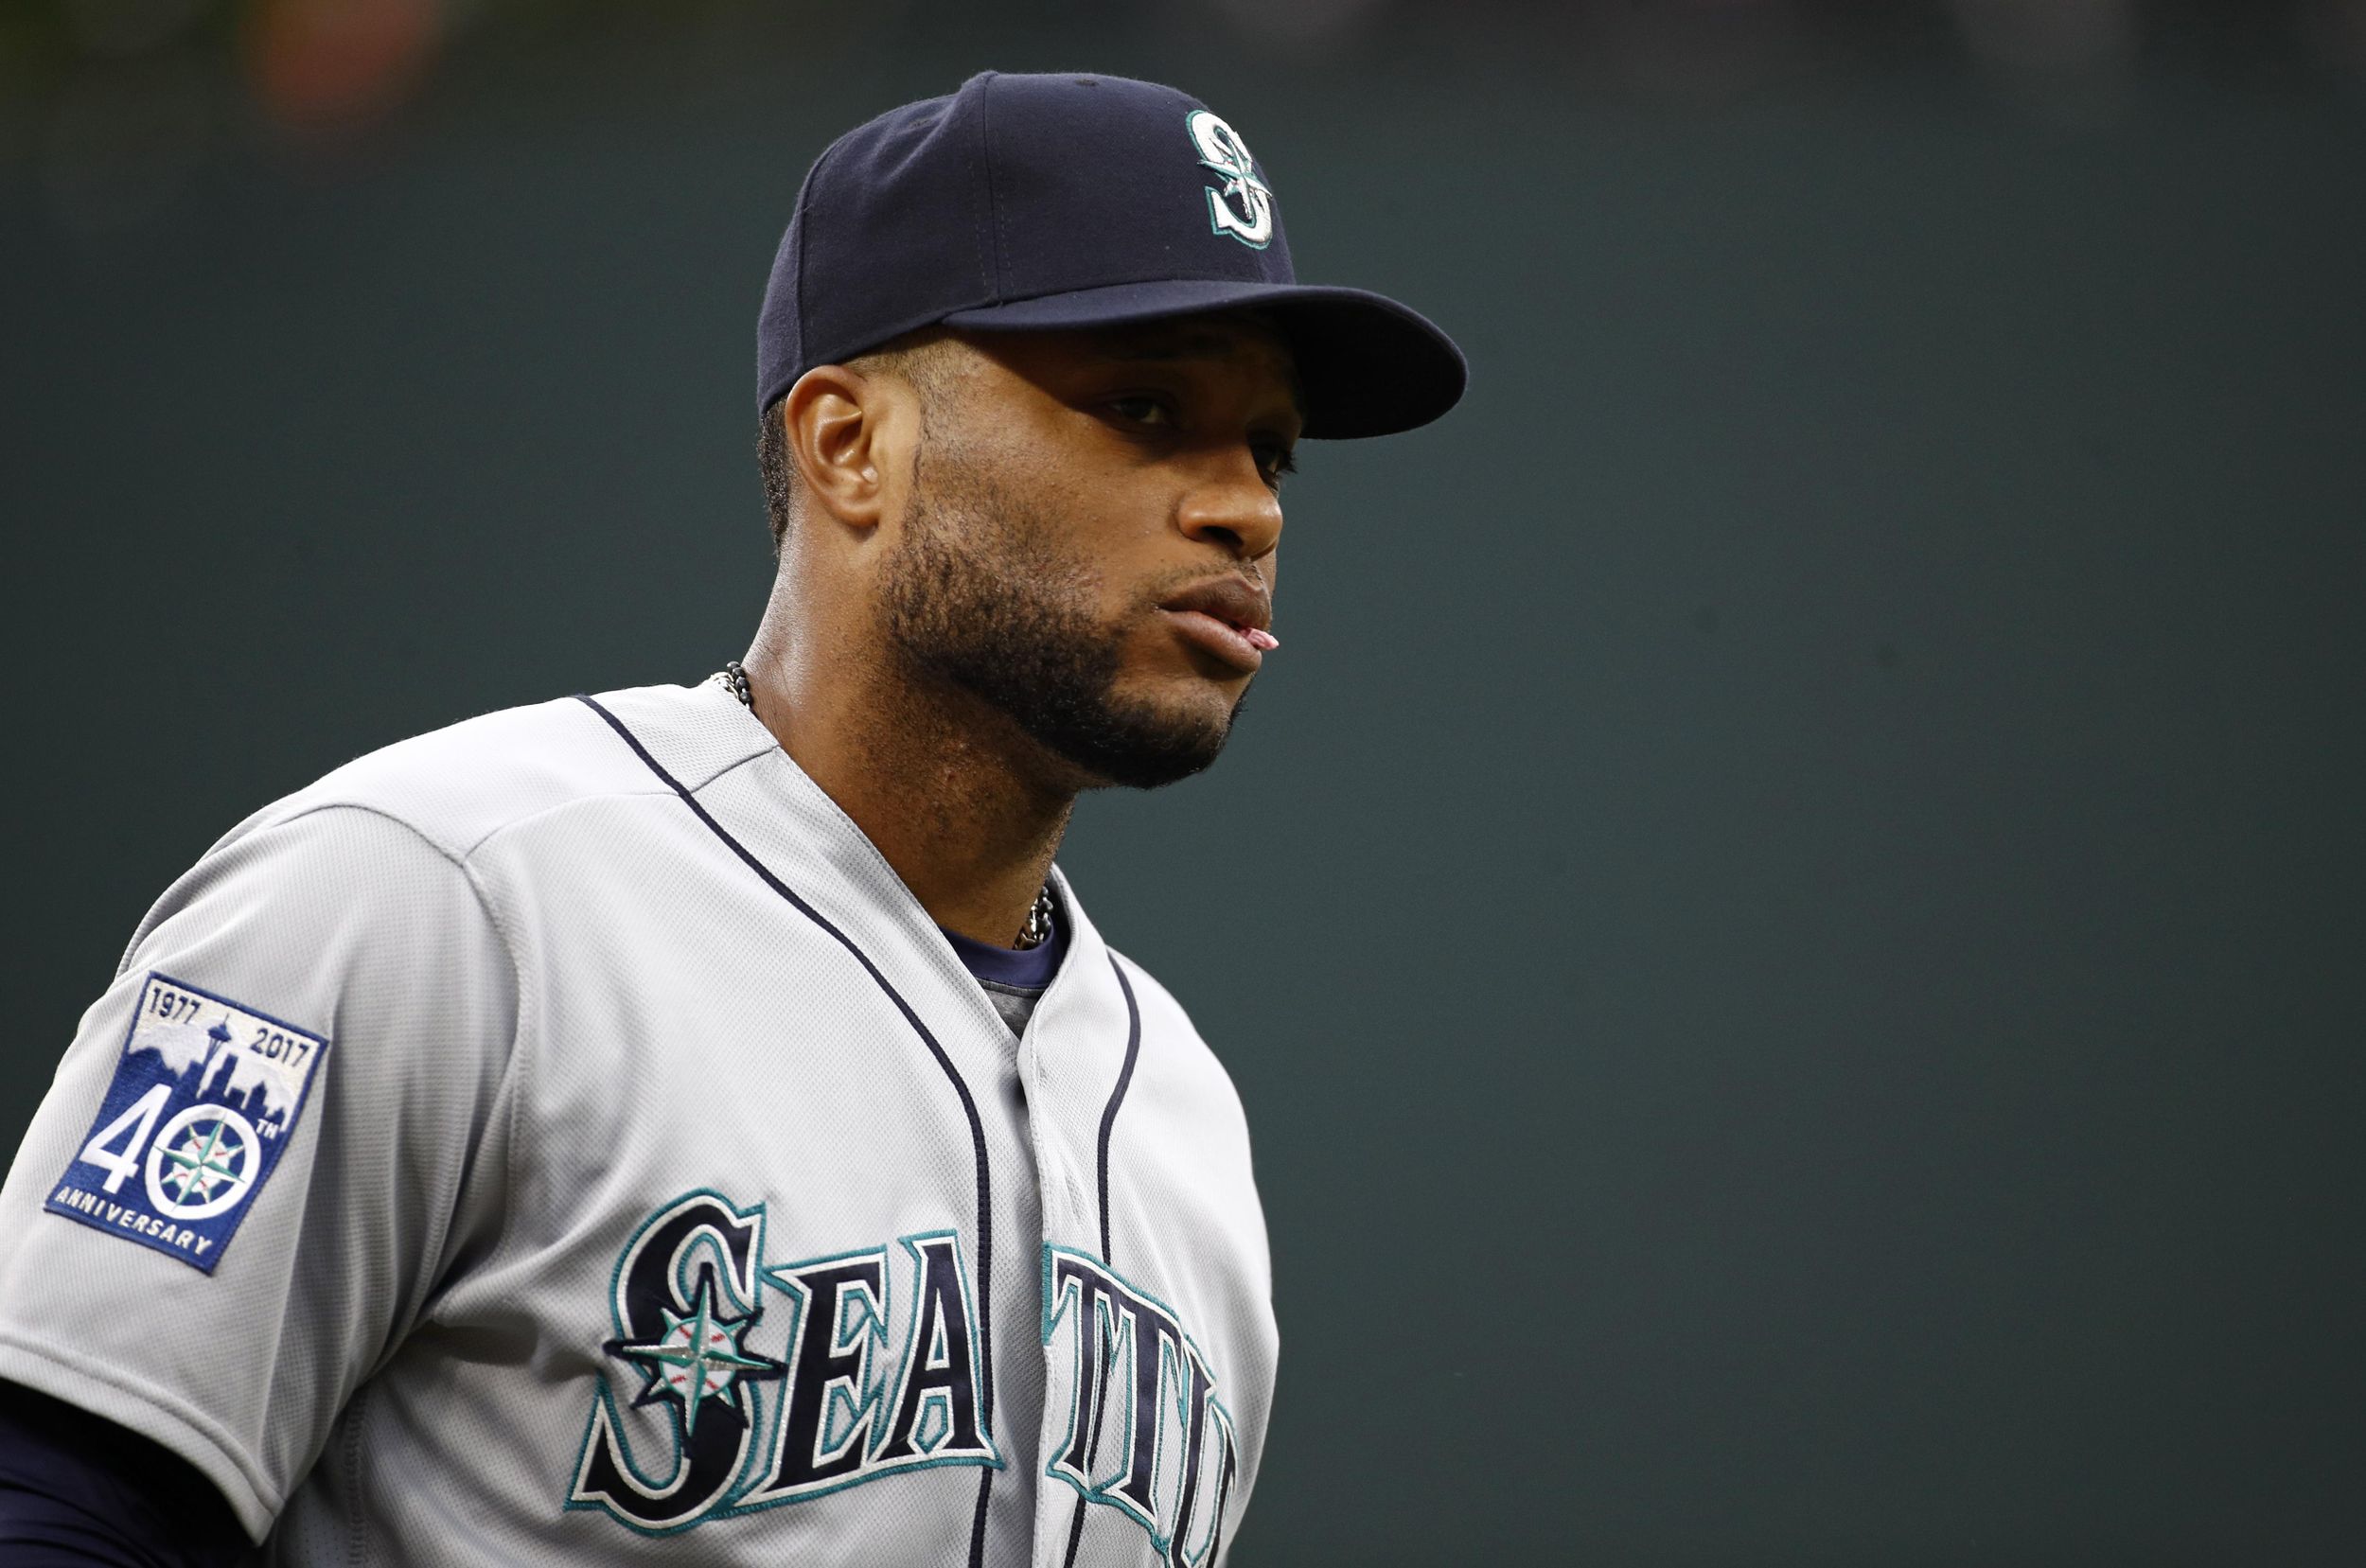 In return to baseball, Robinson Cano plays first base for Tacoma Rainiers,  has a hit